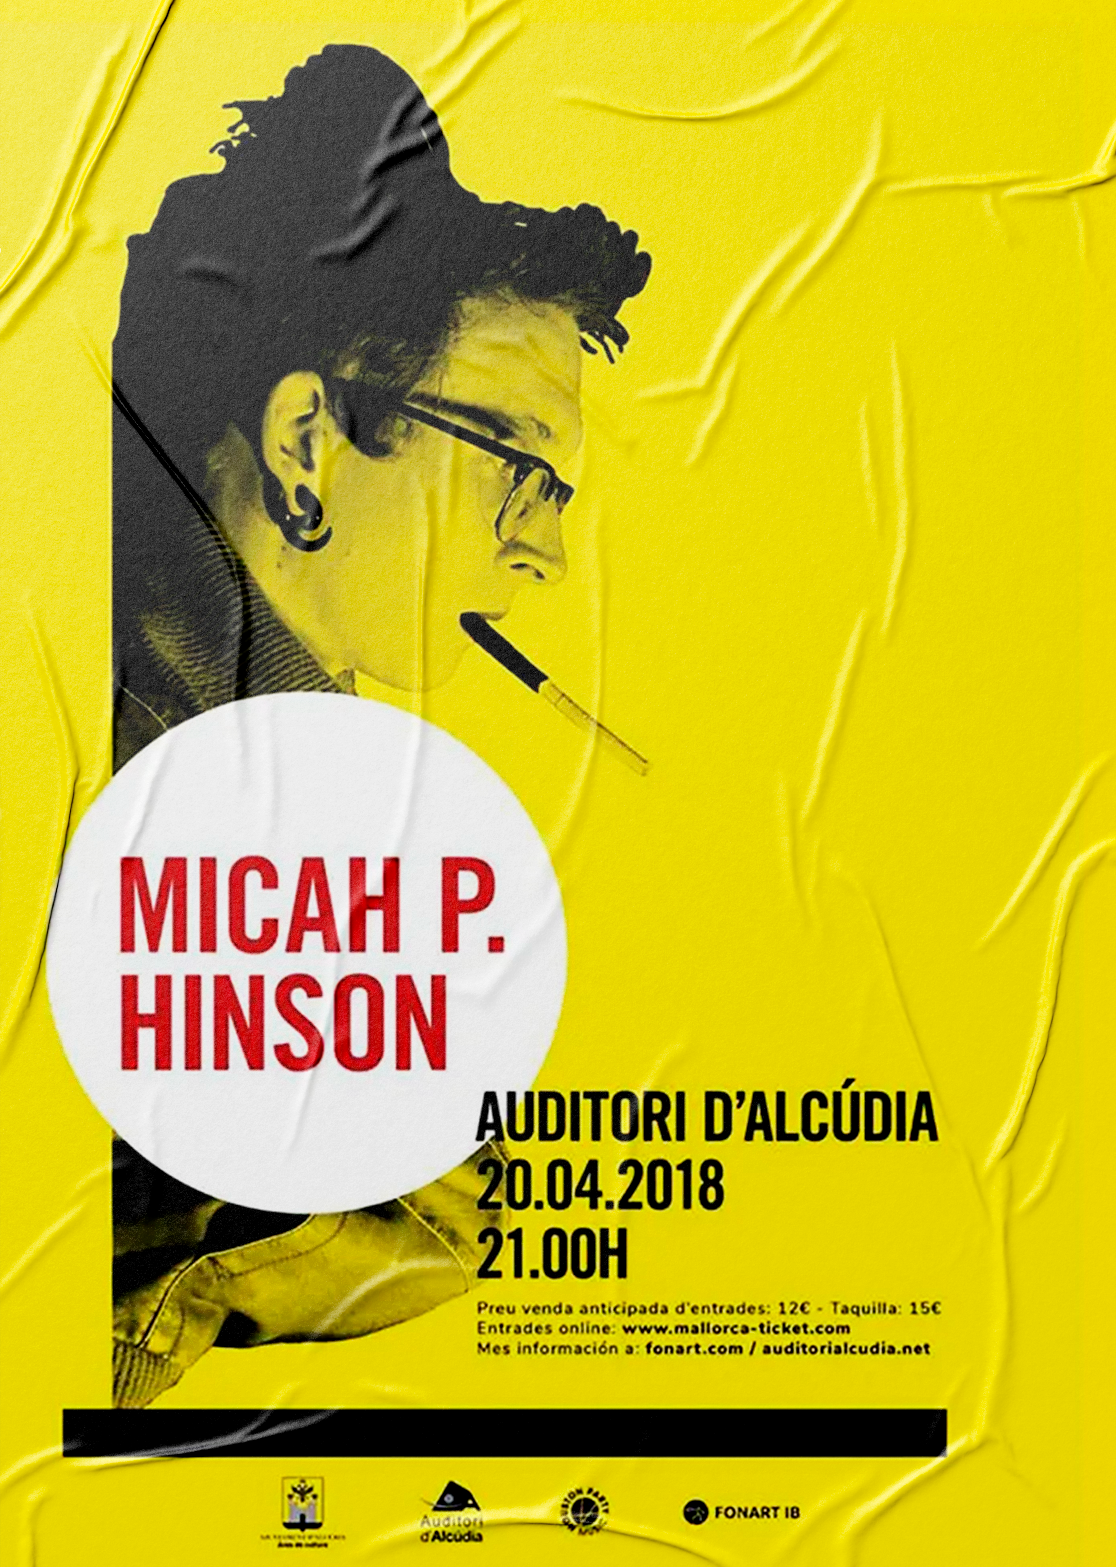 MICAH P. HINSON - CULTURAL MANAGEMENT AND ADVERTISING